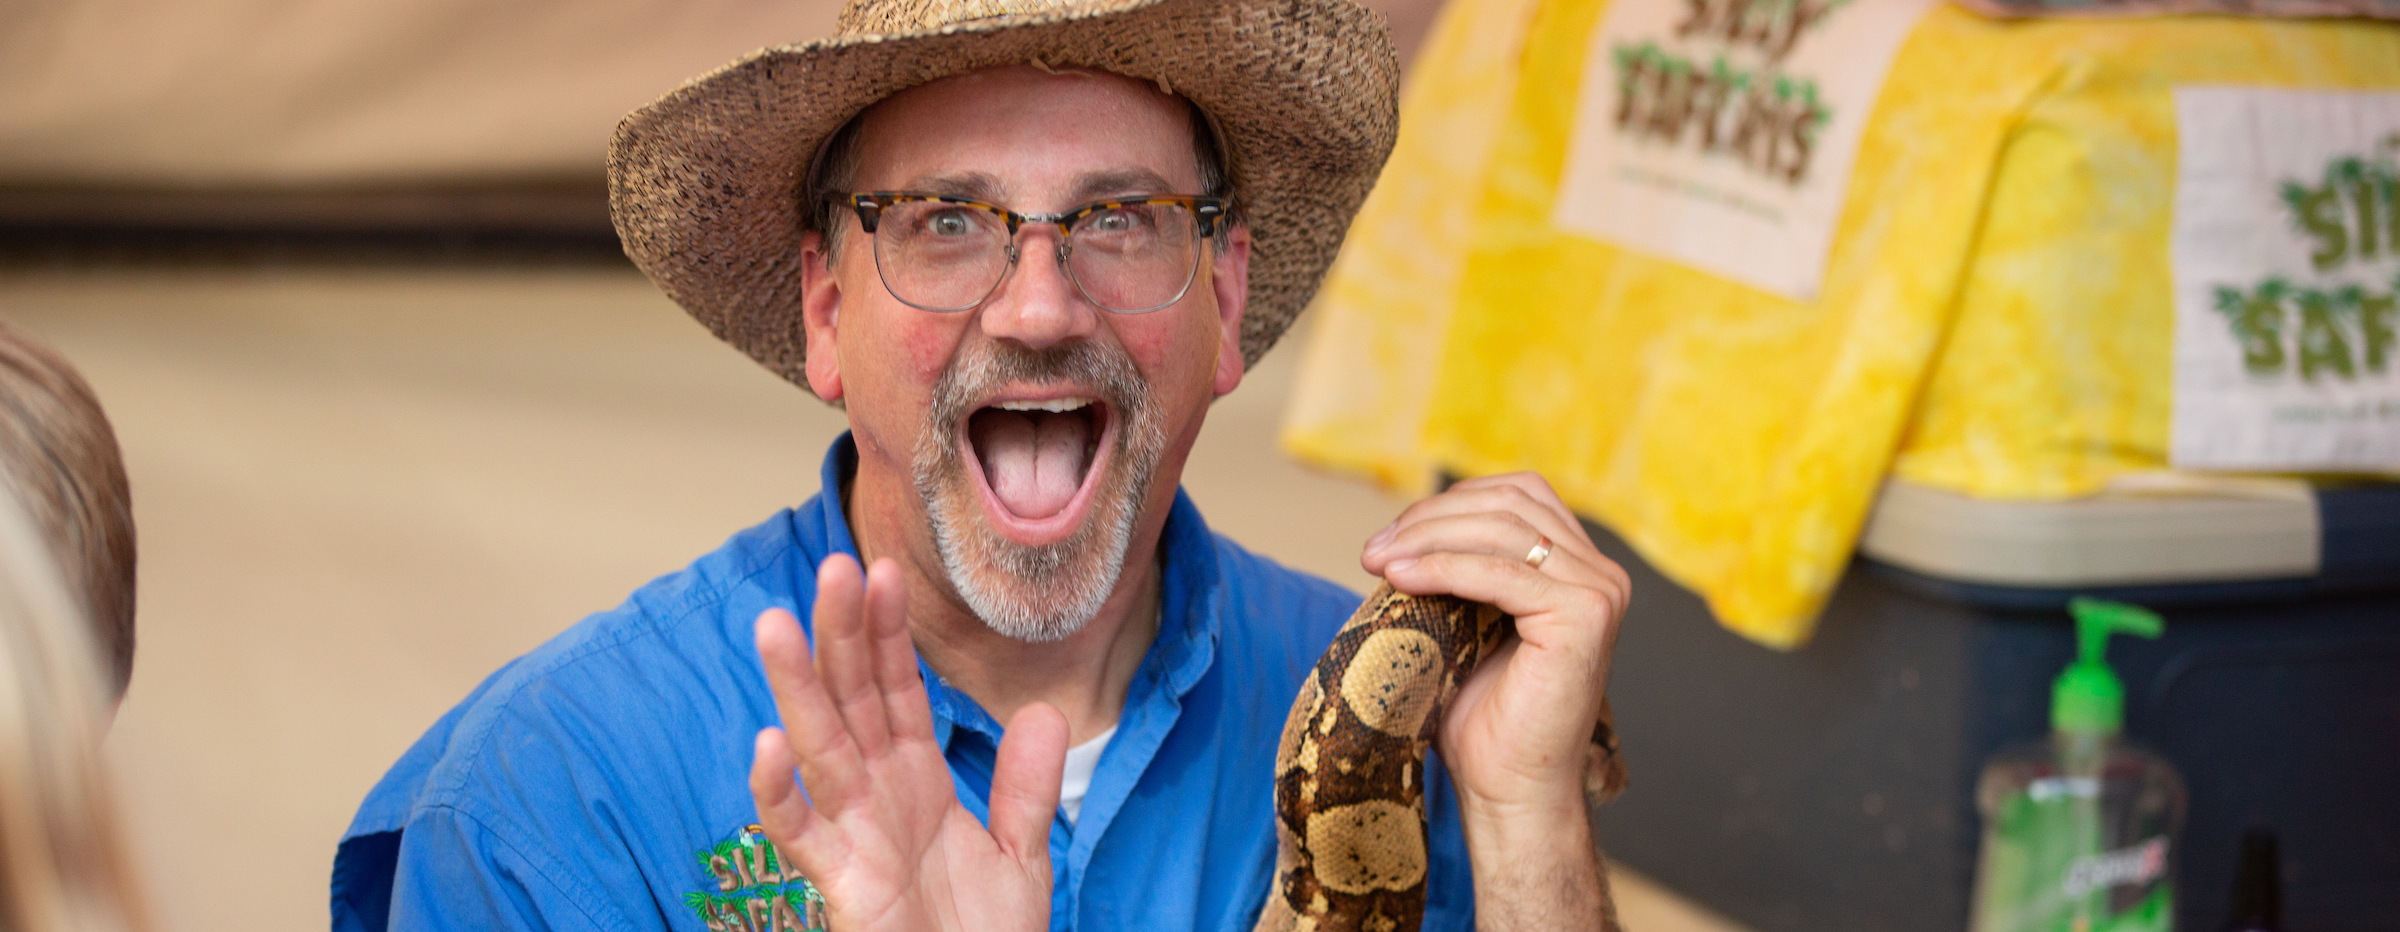 Amazon John holds a snake and makes an excited face at the camera